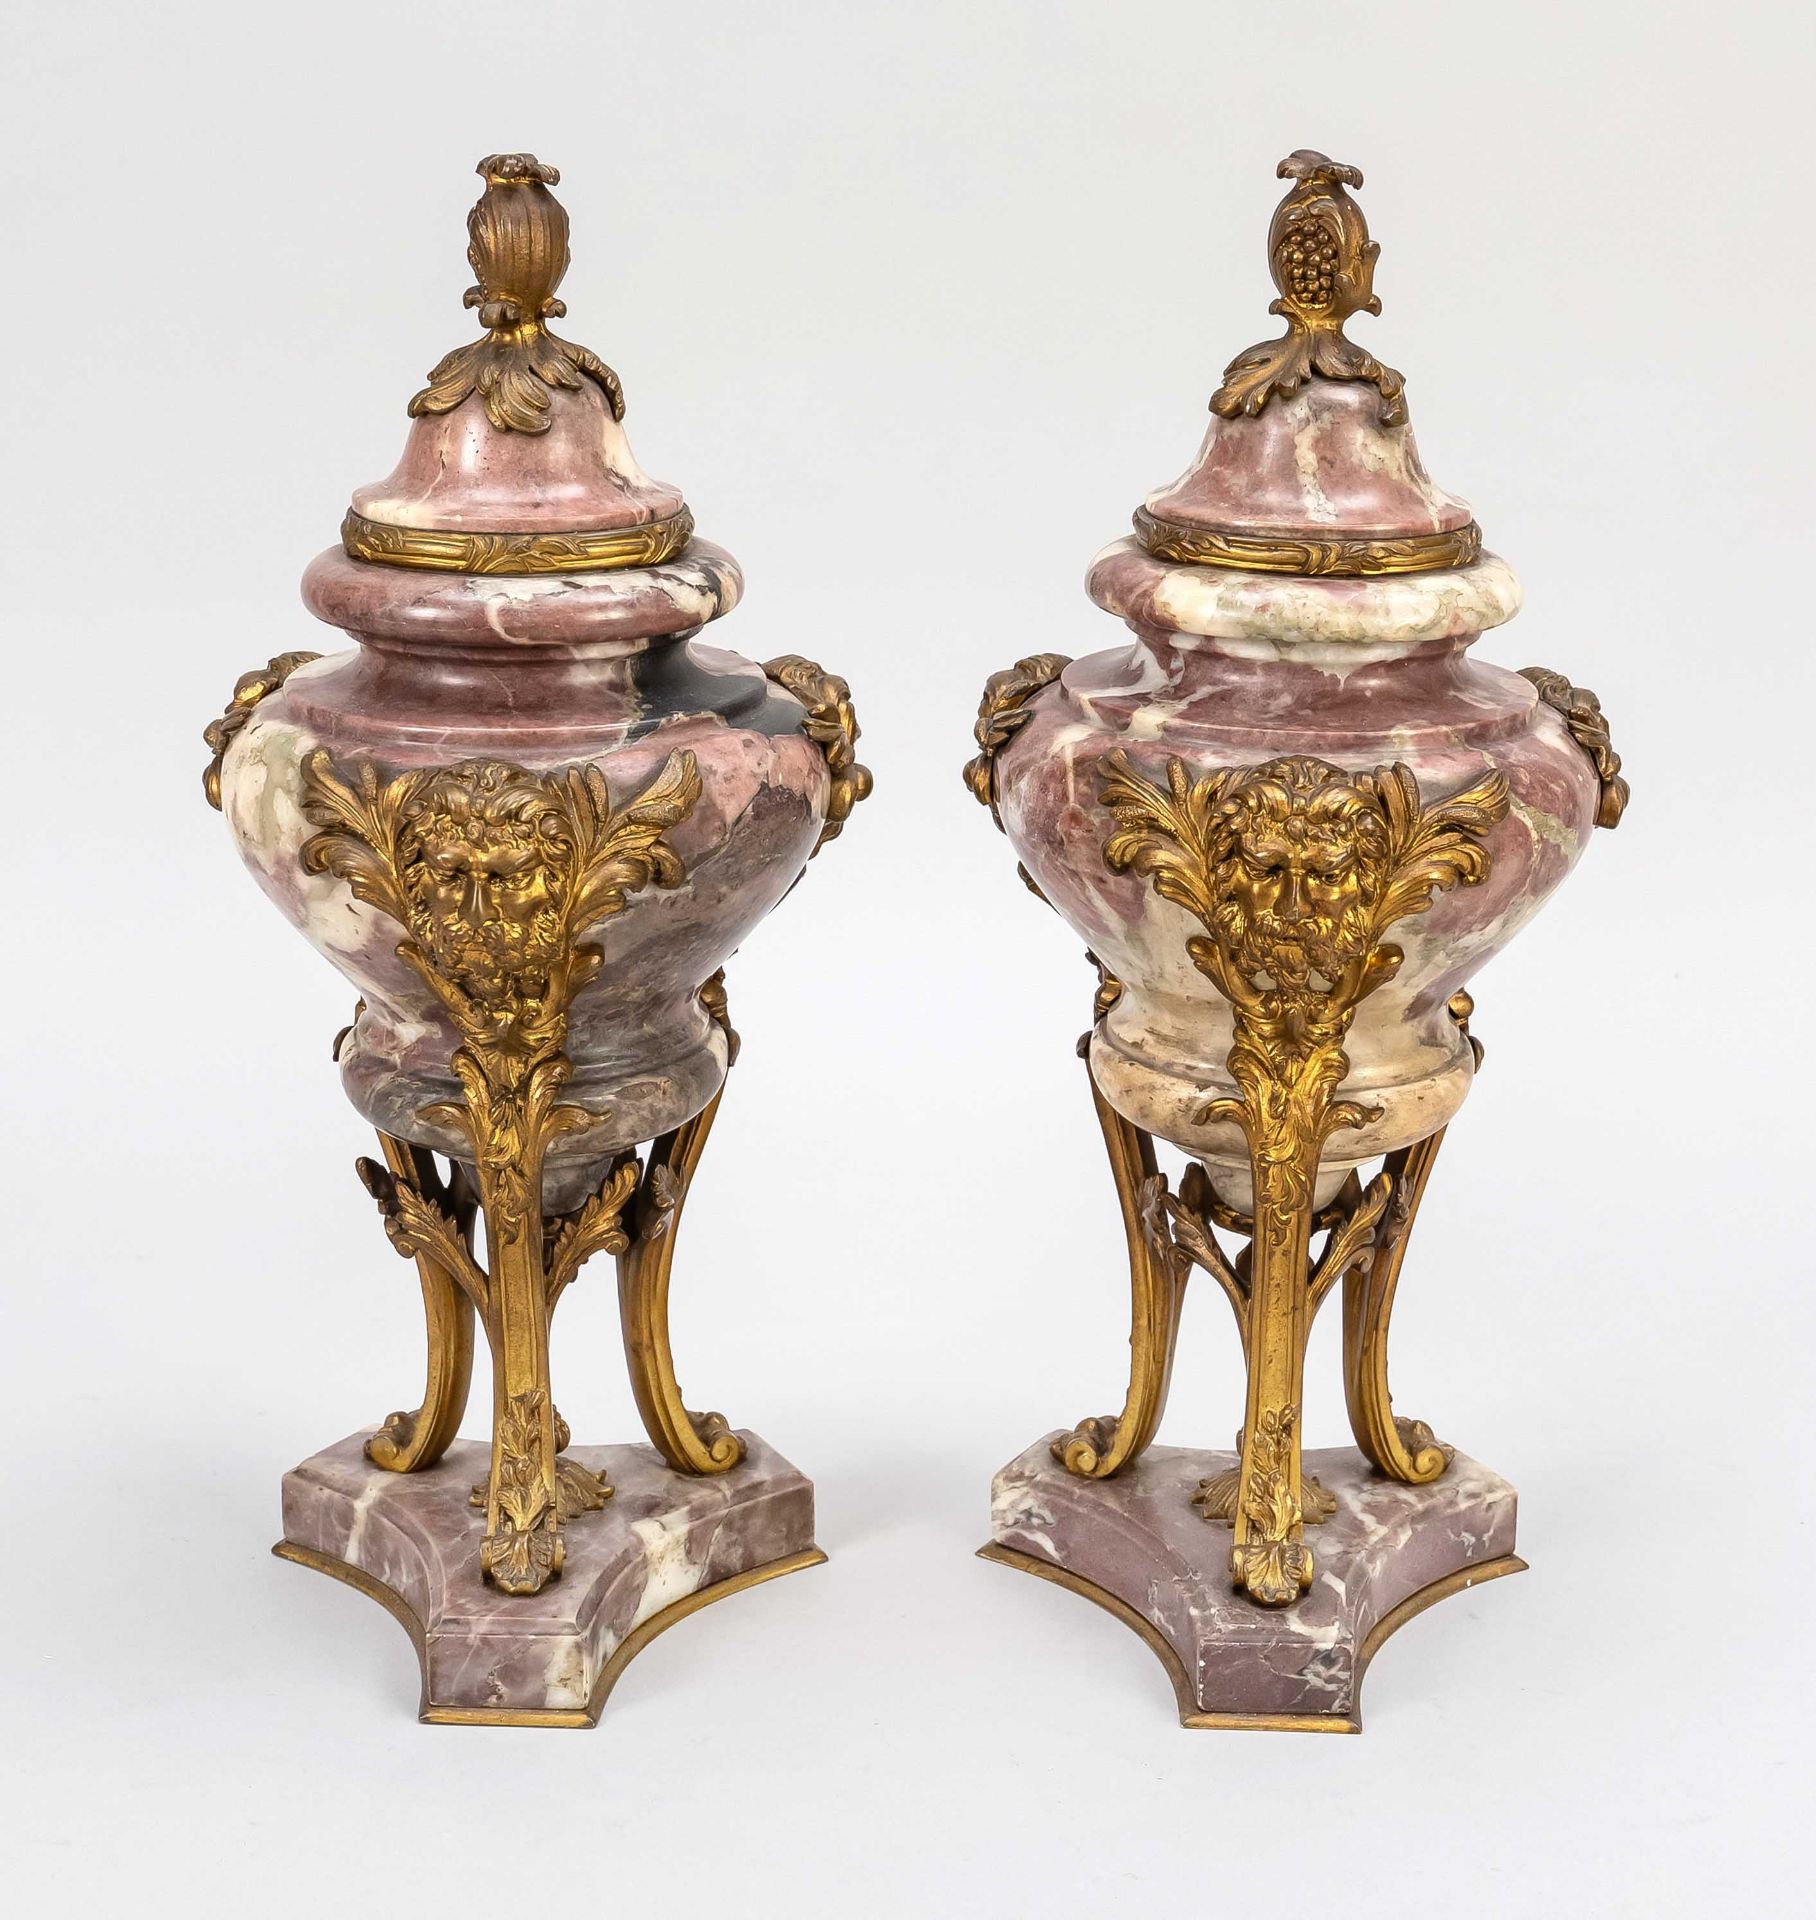 Pair of side plates, 2nd half of 19th c., brass/bronze gilded with red-white-black spotted marble,